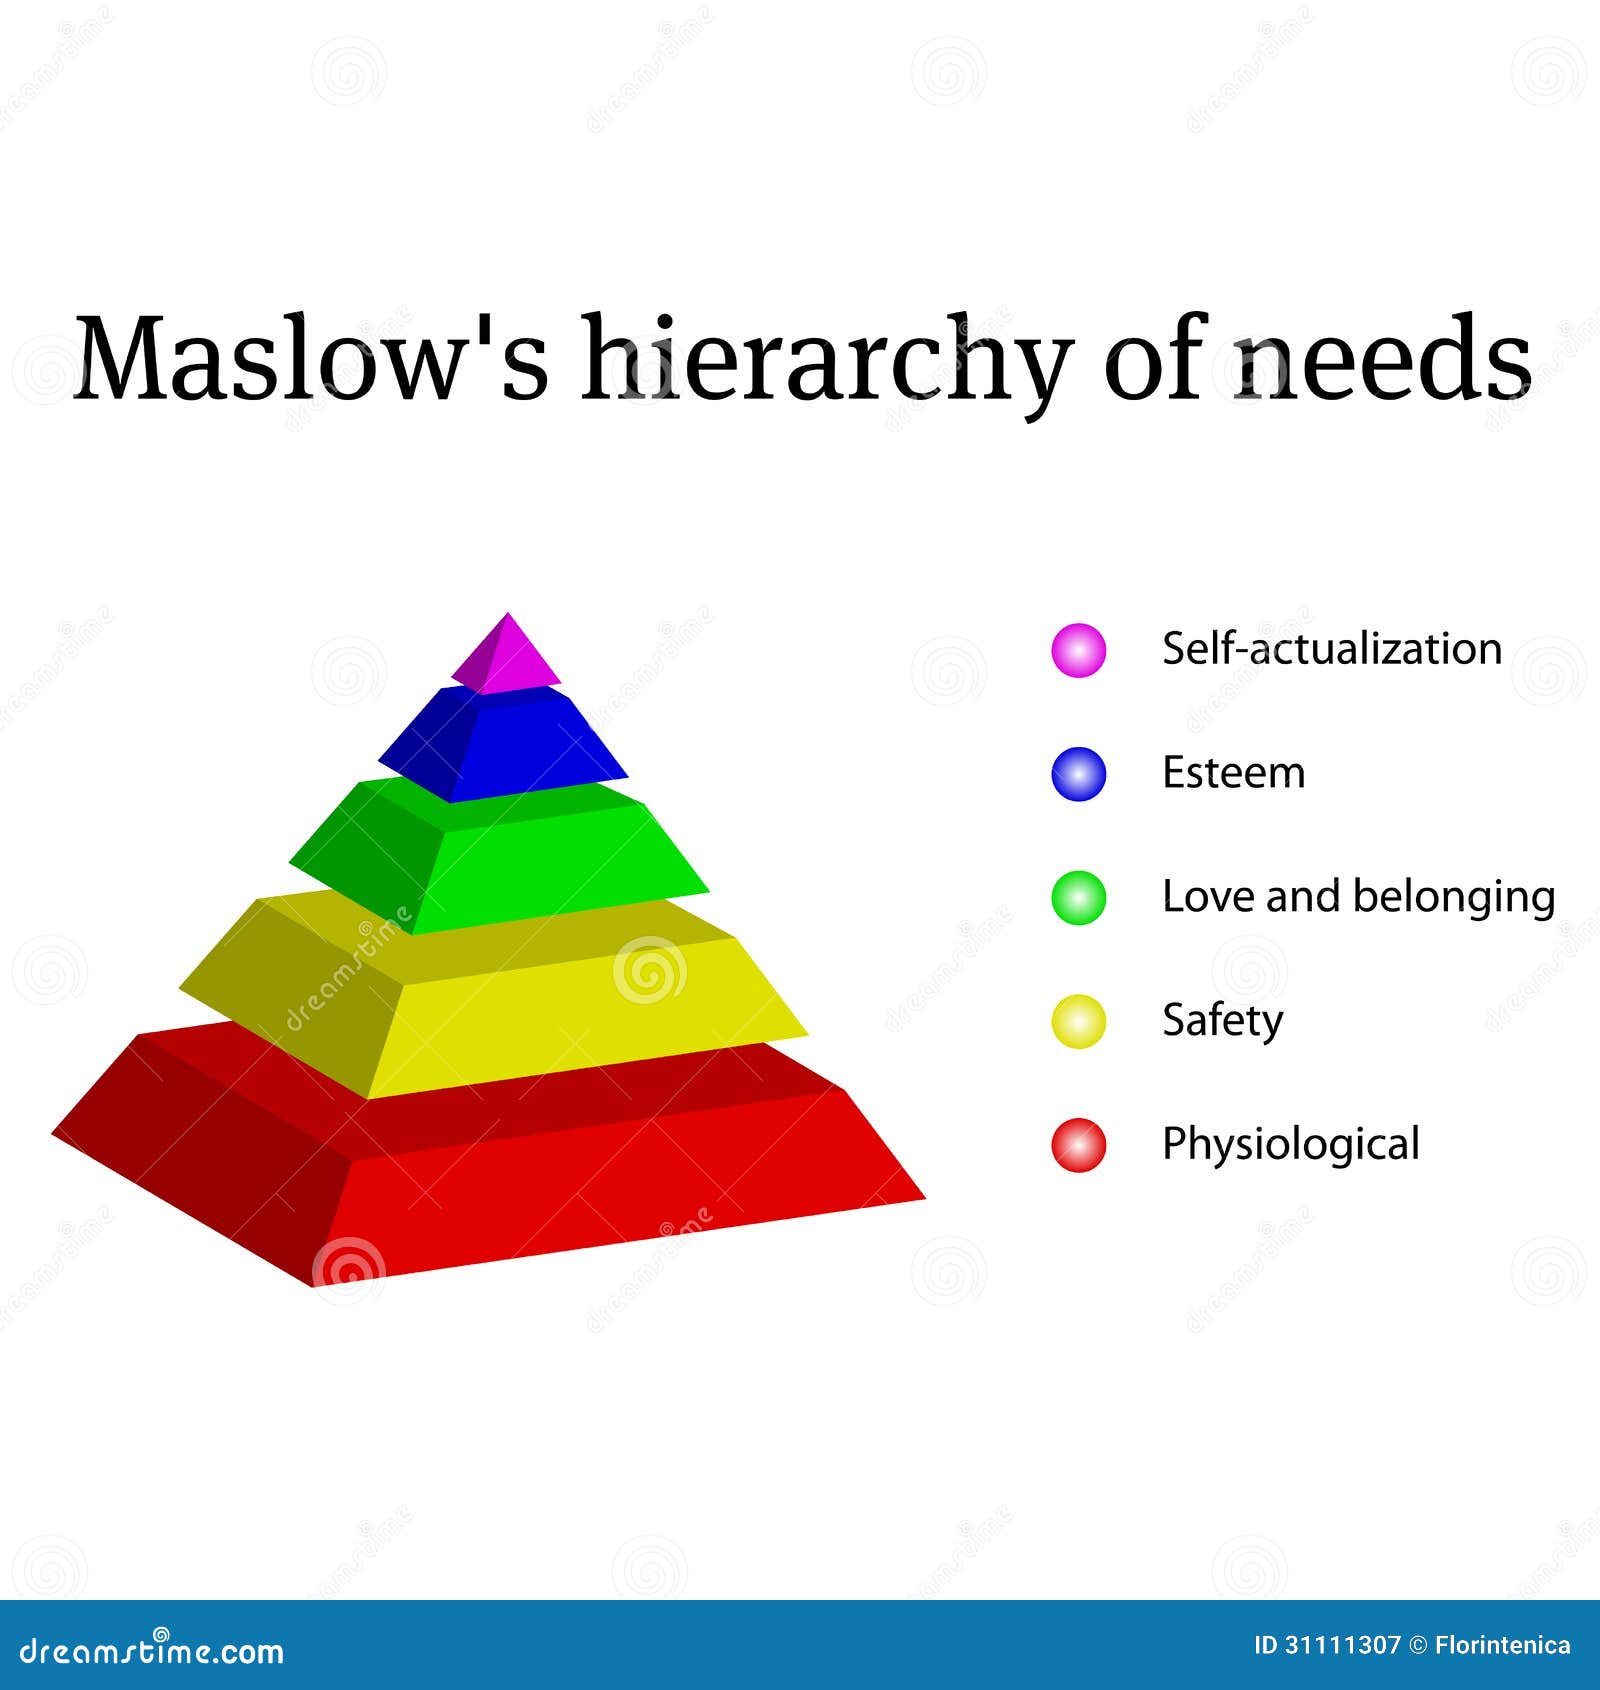 The needs theory: motivating employees with maslows 